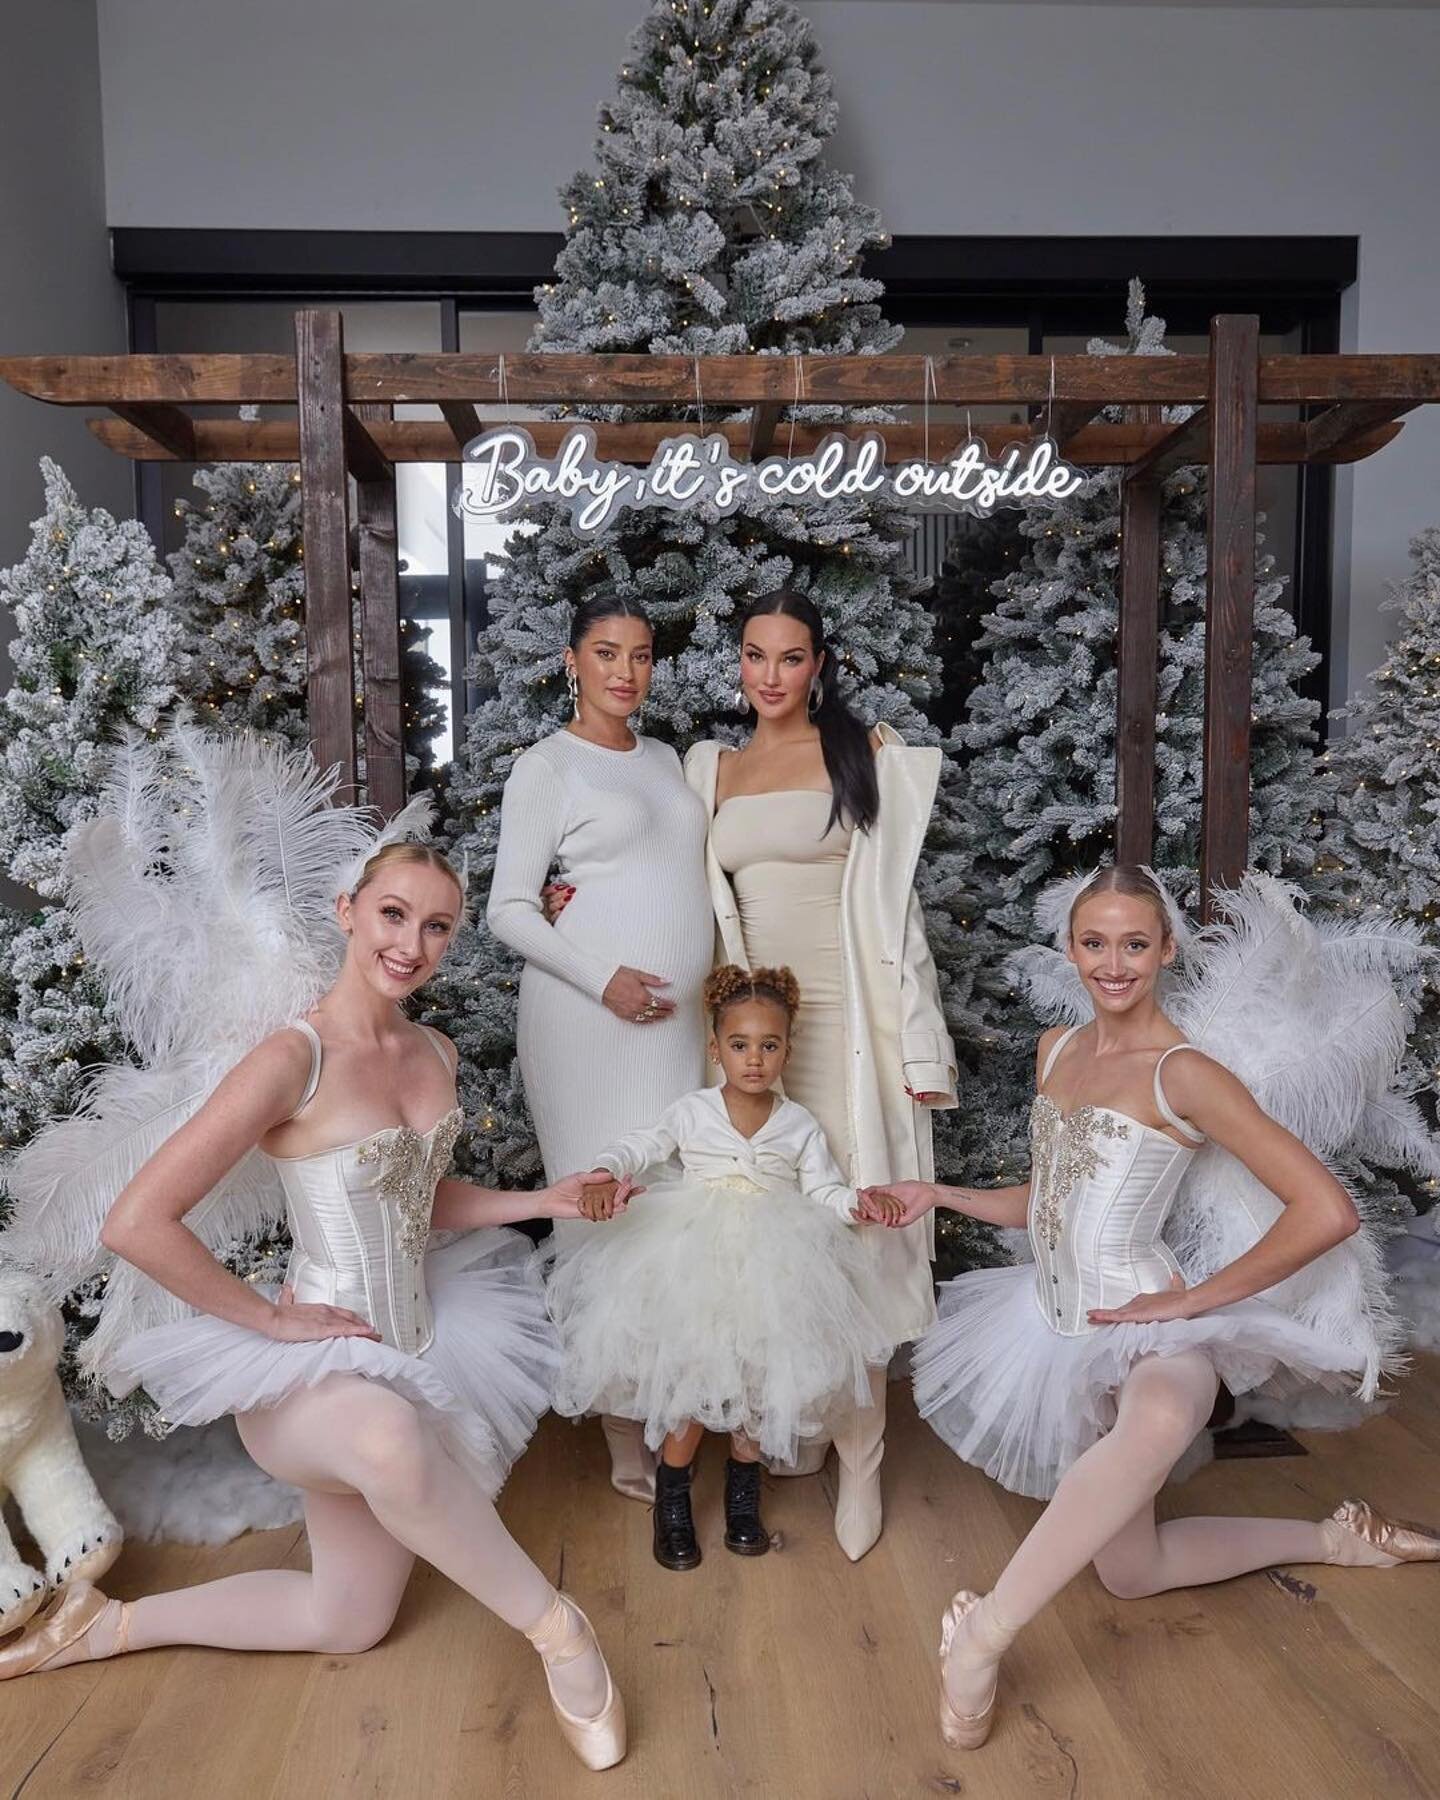 We want a bestie like @nataliehalcro!  Such a lovely baby shower for @justtnic featuring our ballerinas 
Photos by @irmalomidze 
.
#Repost @nataliehalcro
・・・
A White Christmas Baby Shower for my bestie @justtnic I love you ❄️ Thank you to @etiquettel